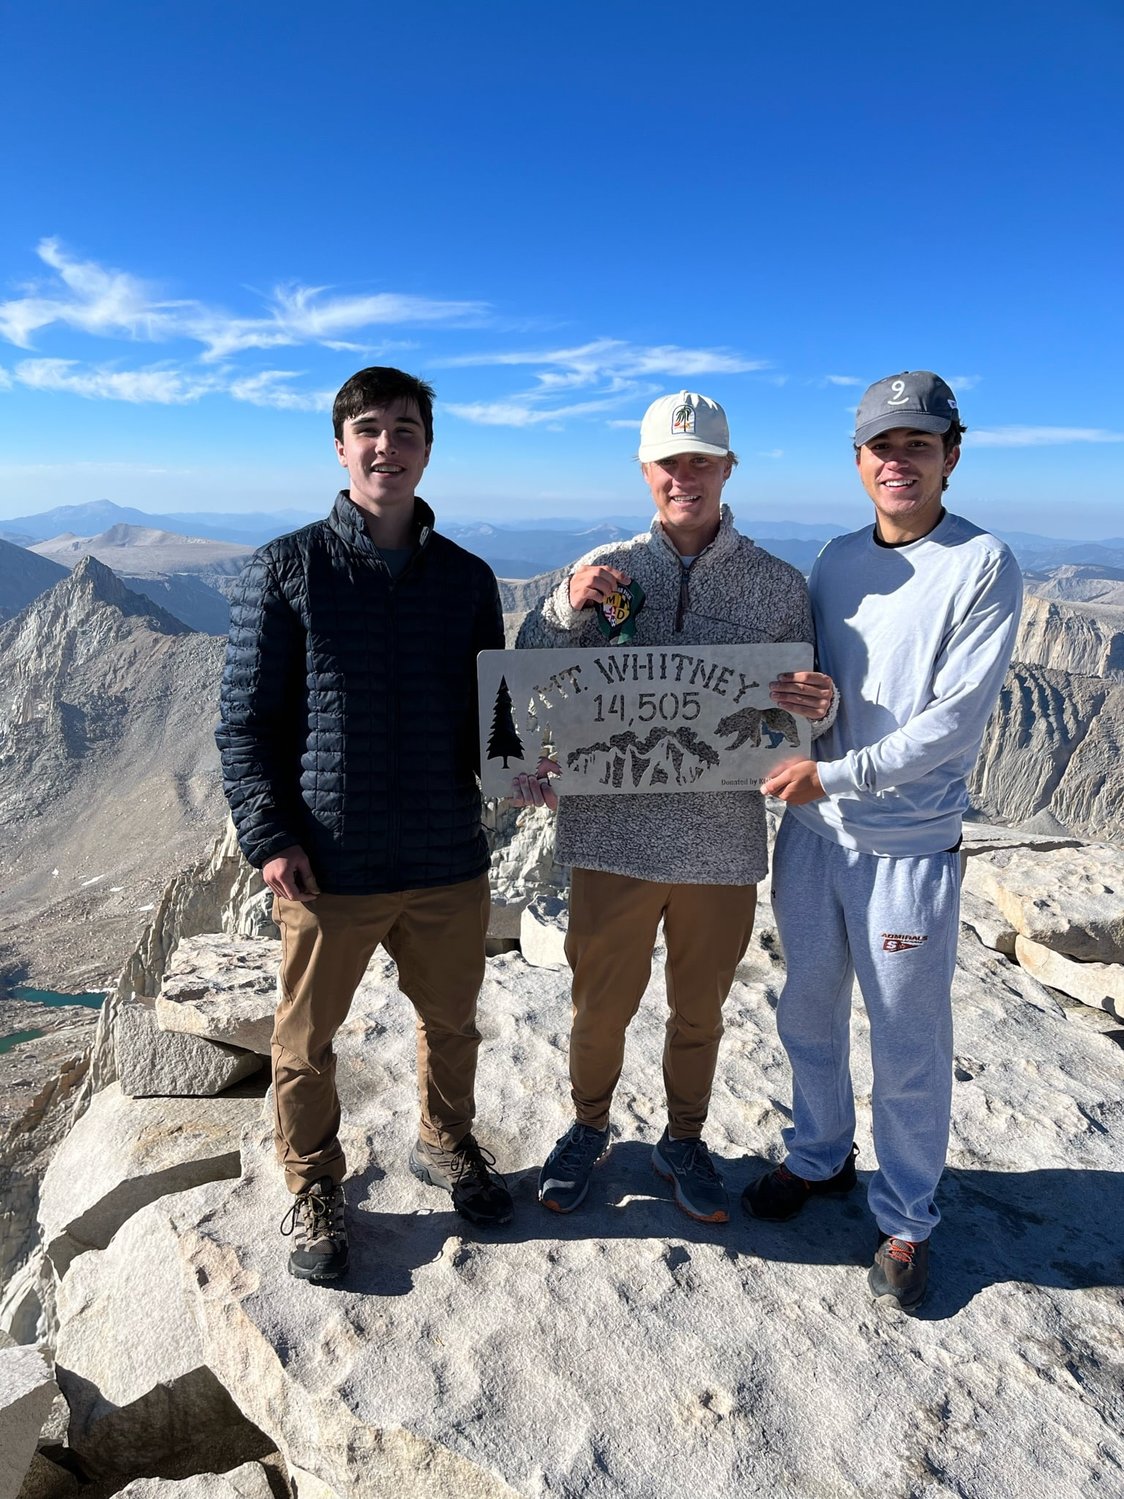 Owen Muldoon, Davis Cawlfield and Cole Keefer summited Mount Whitney in California during late July.